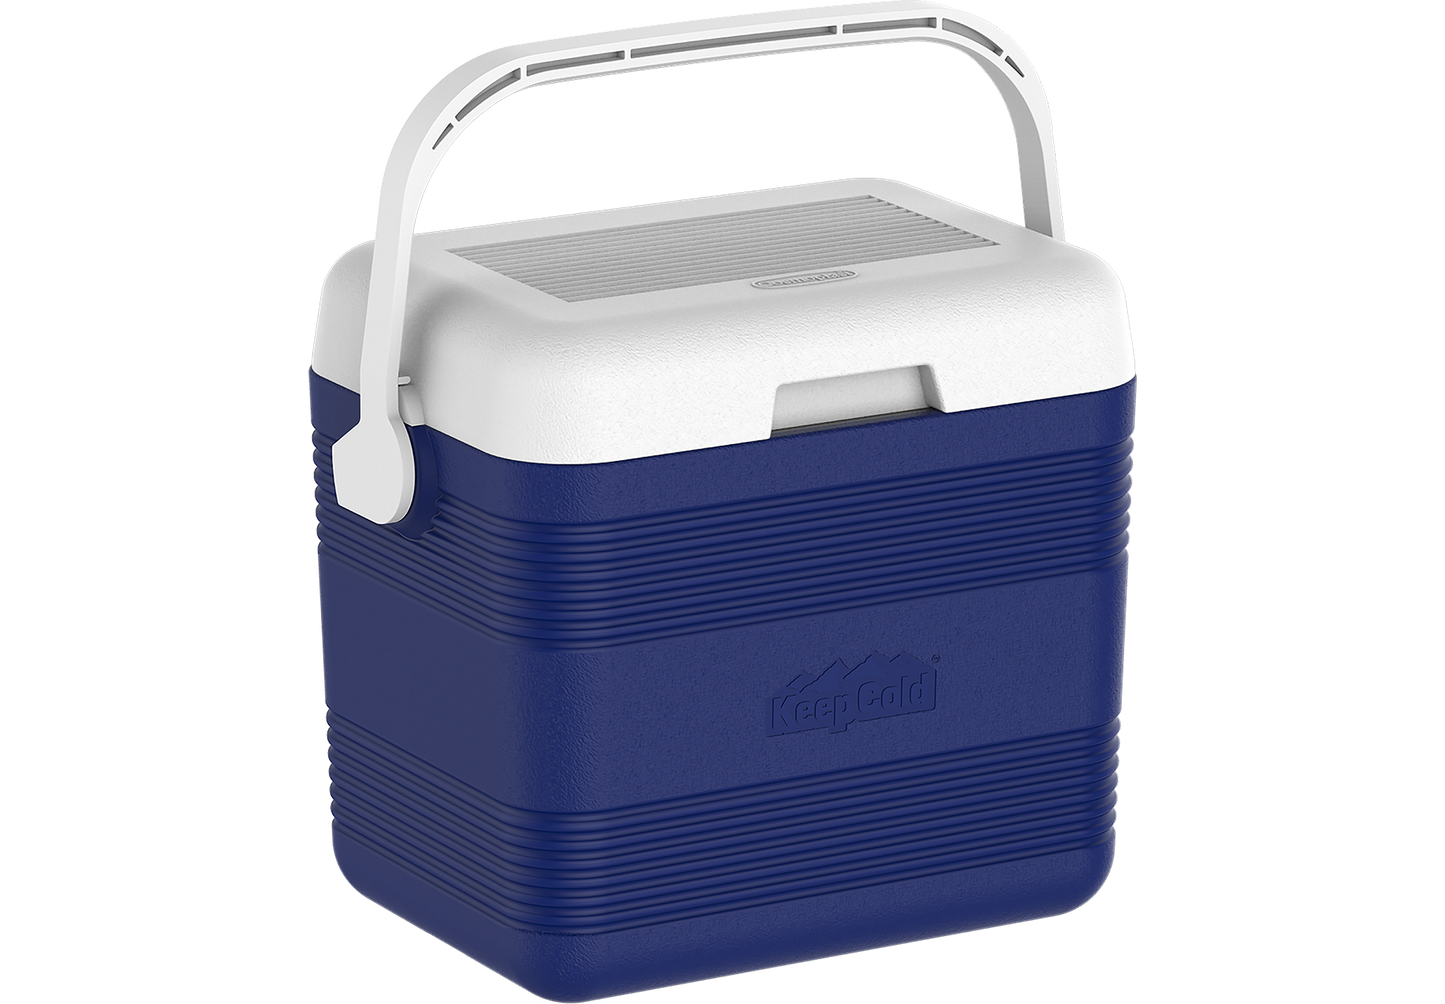 10L KEEPCOLD DELUXE ICEBOX - Cosmoplast Bahrain